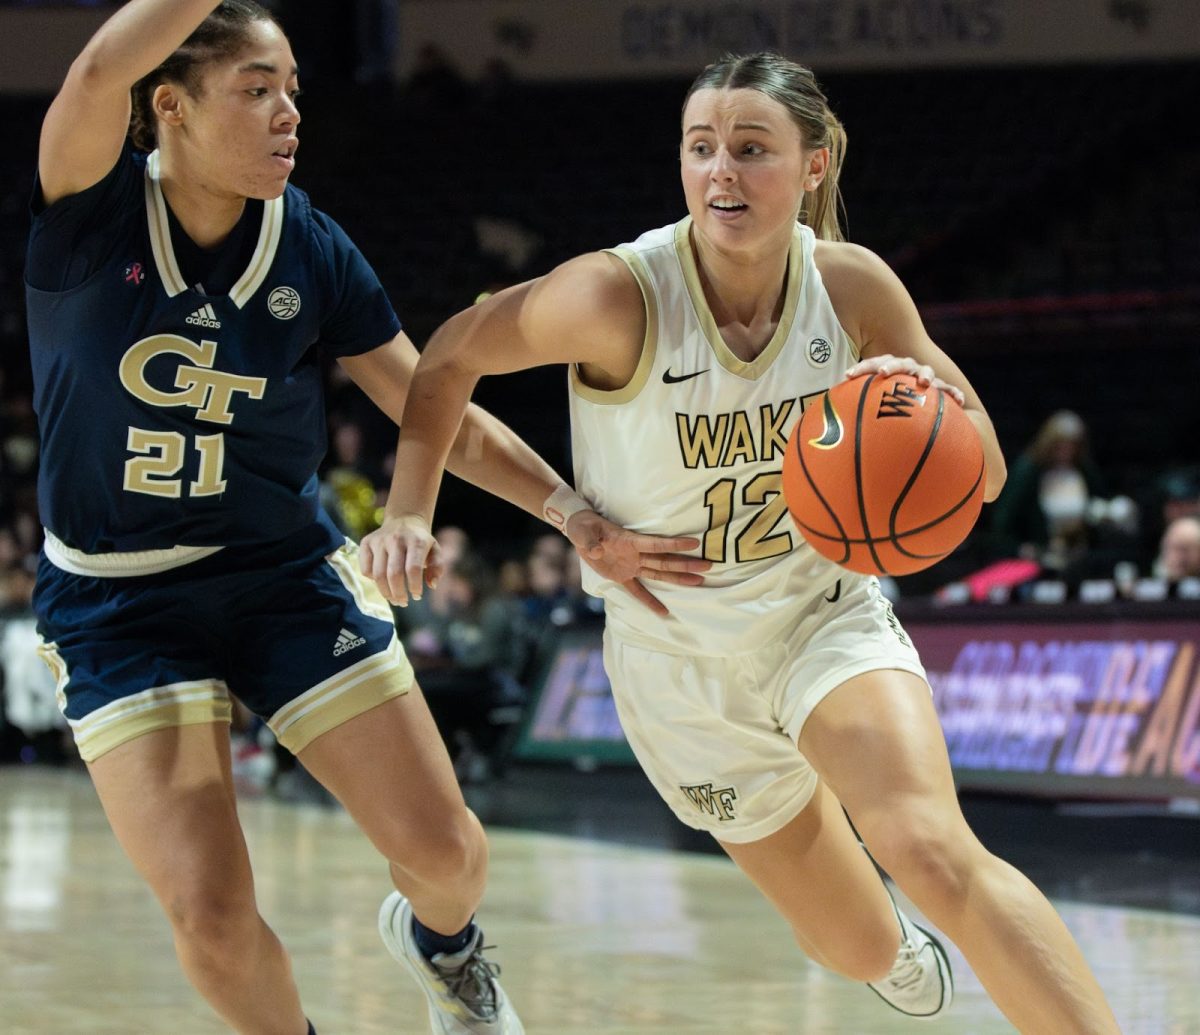 Guard Katie Deeble (12) drives past a Georgia Tech defender on February 4th. The freshman guard had a career-high 20 points in the Demon Deacons’ rematch with Georgia Tech this past week.